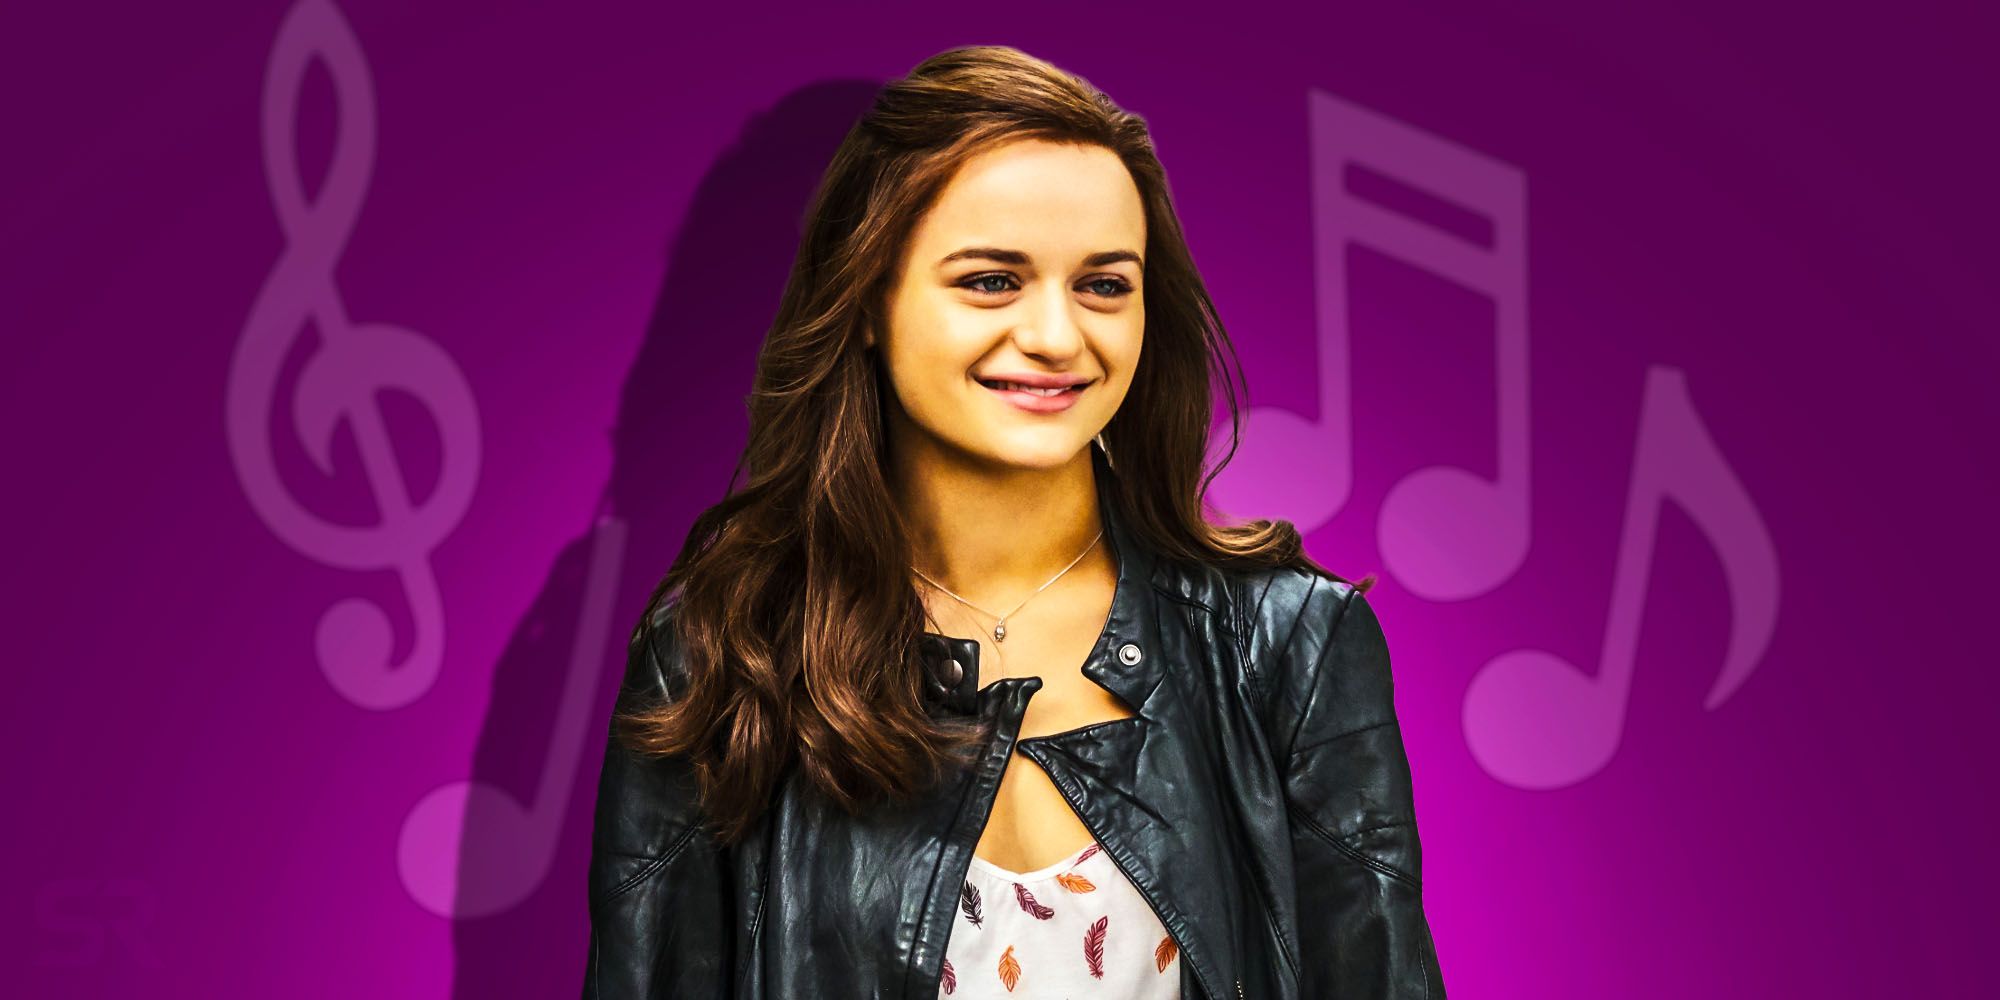 Joey king Kissing Booth 3 Soundtrack guide